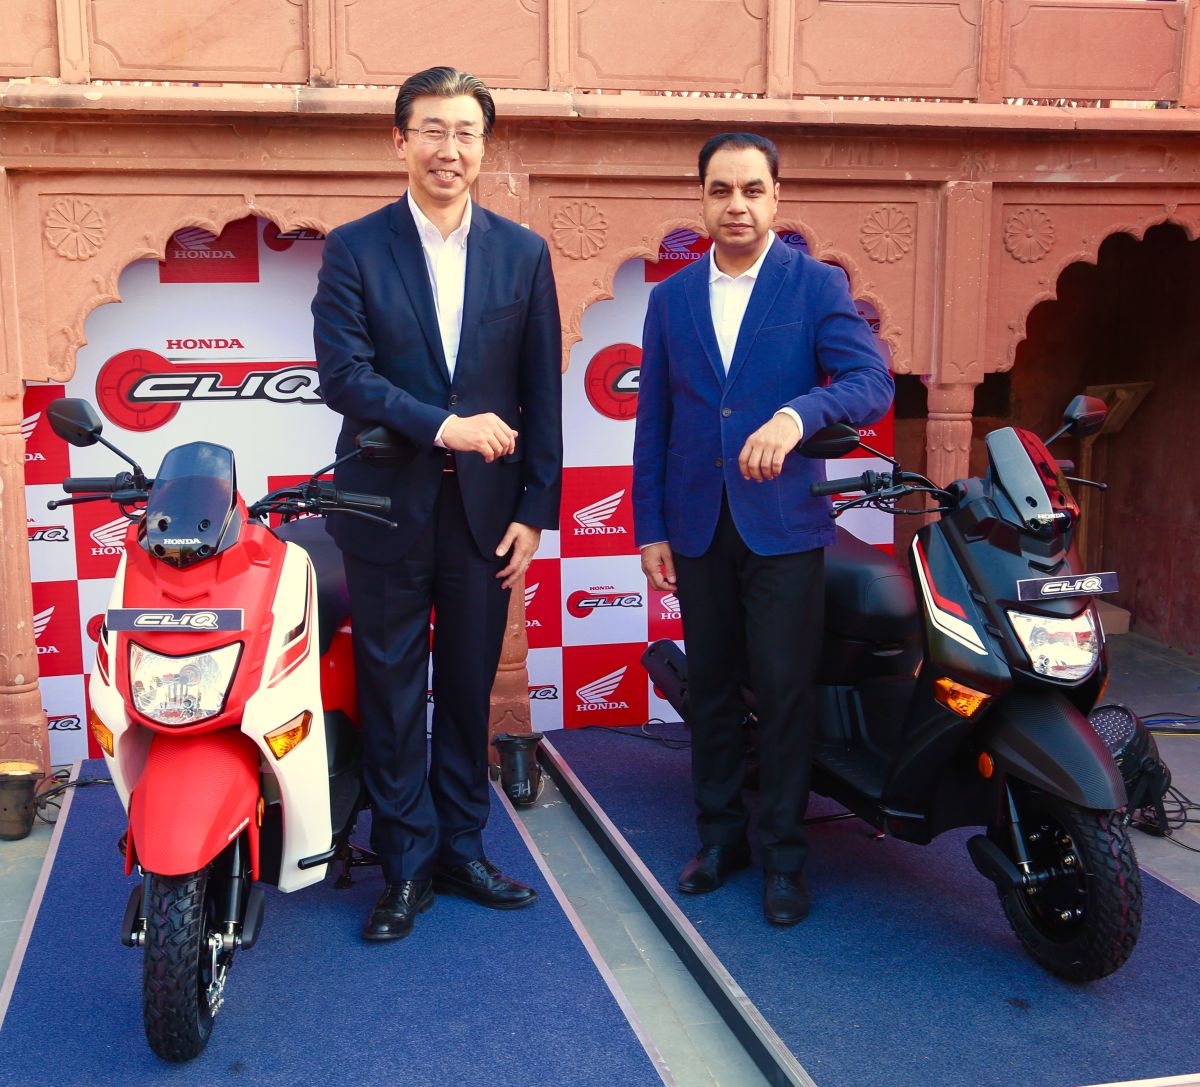 Honda Cliq scooter launched in India